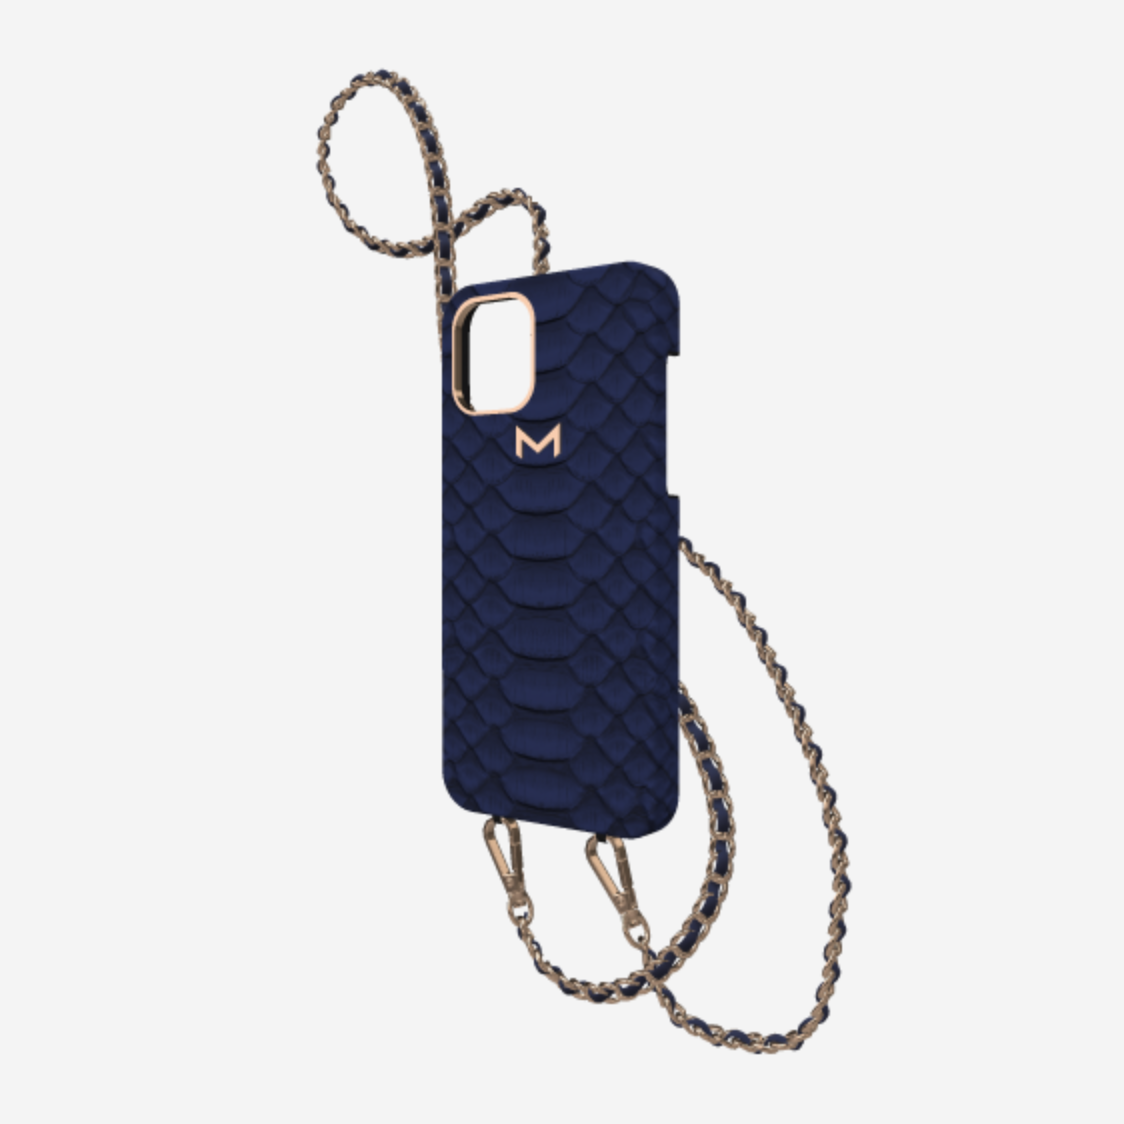 Necklace Case for iPhone 12 Pro Max in Genuine Python Navy Blue Rose Gold 